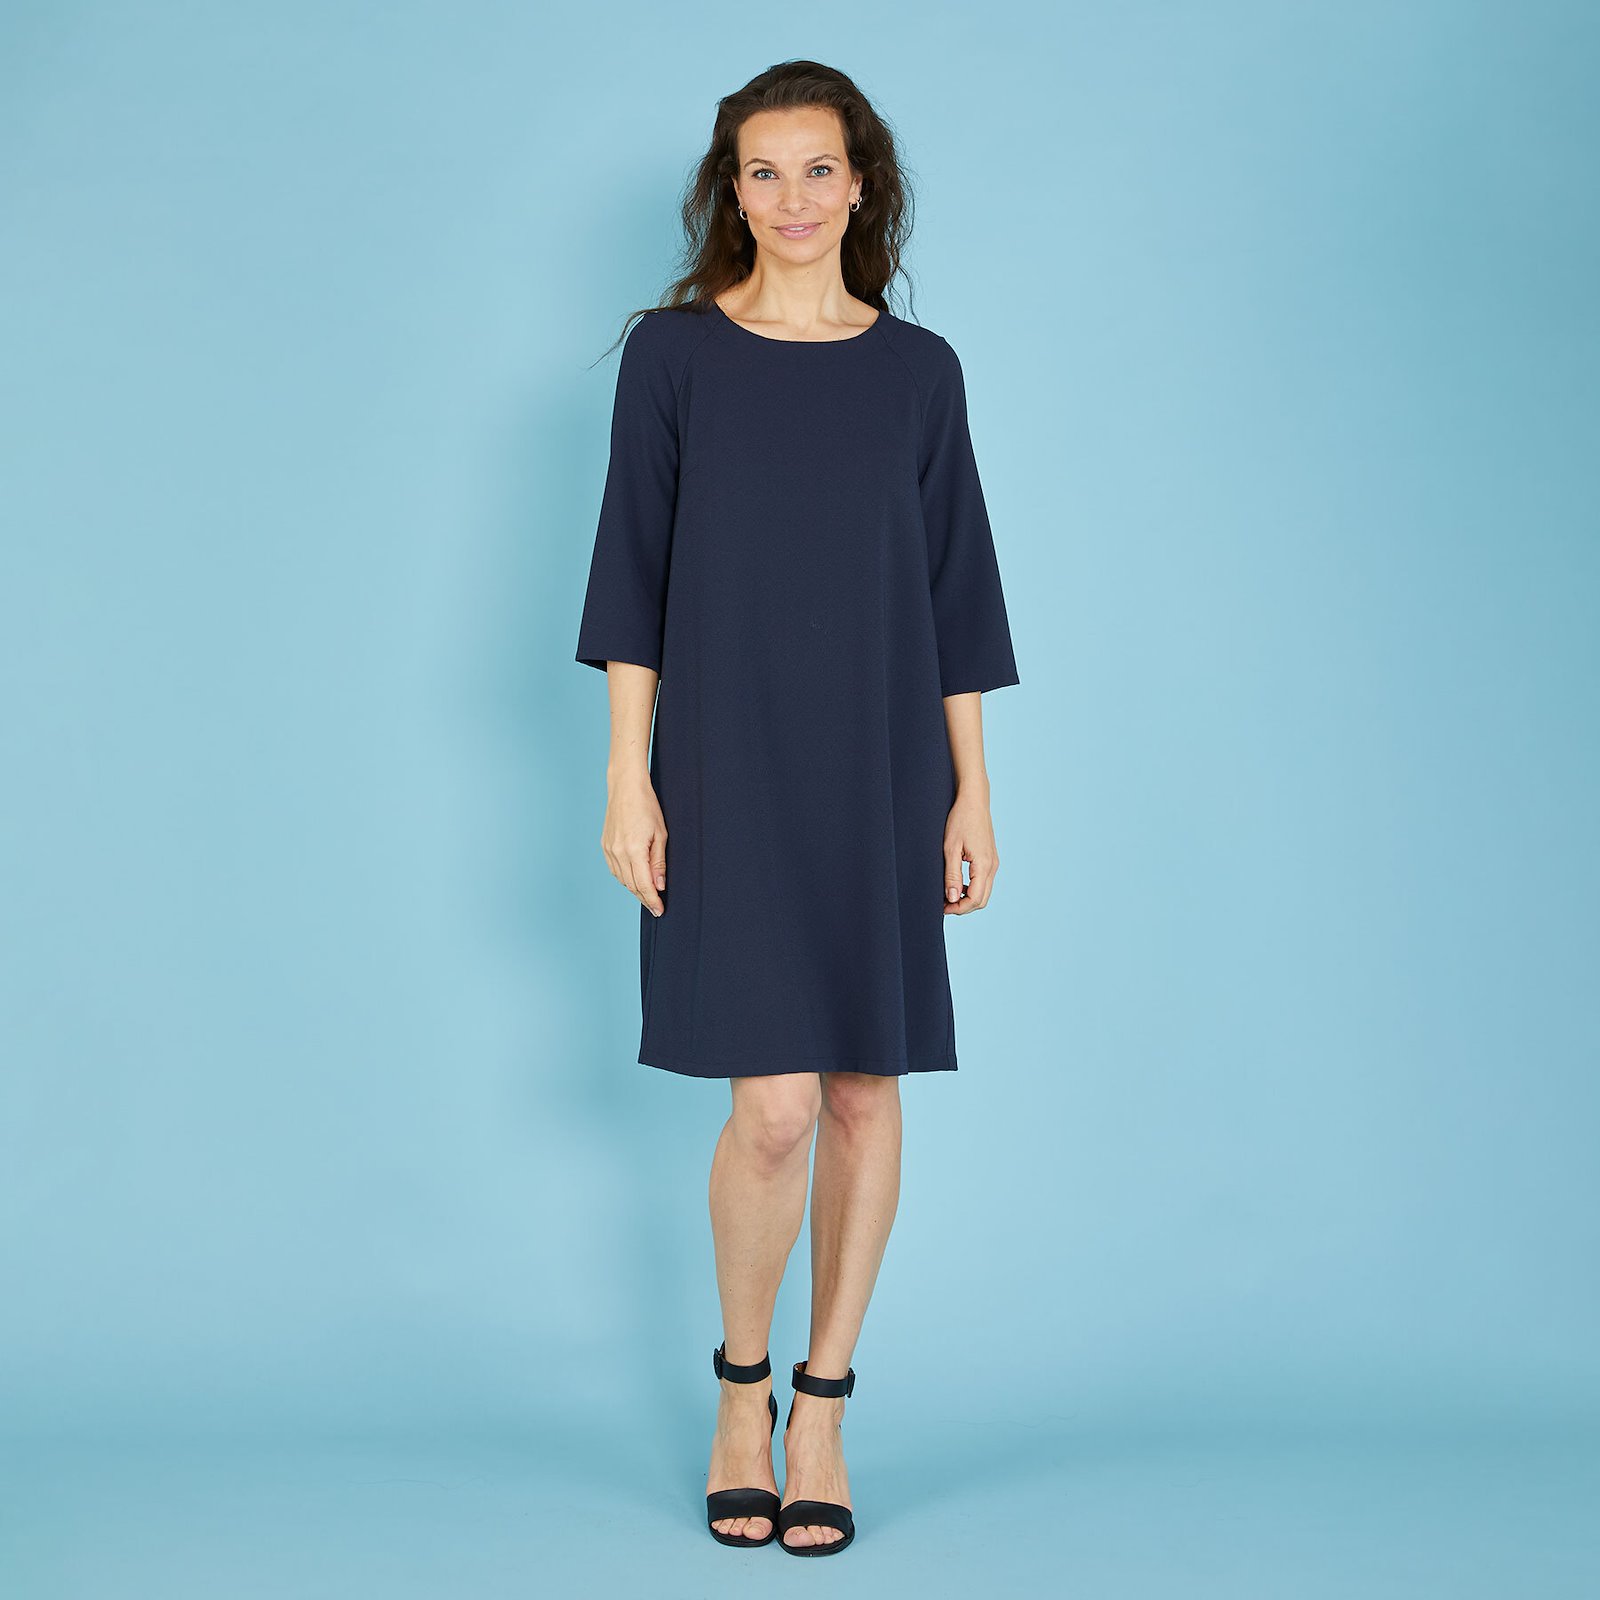 Dress with A-shape and raglan sle, 52/24 p23175000_p23175001_p23175002_p23175003_p23175004_pack_d